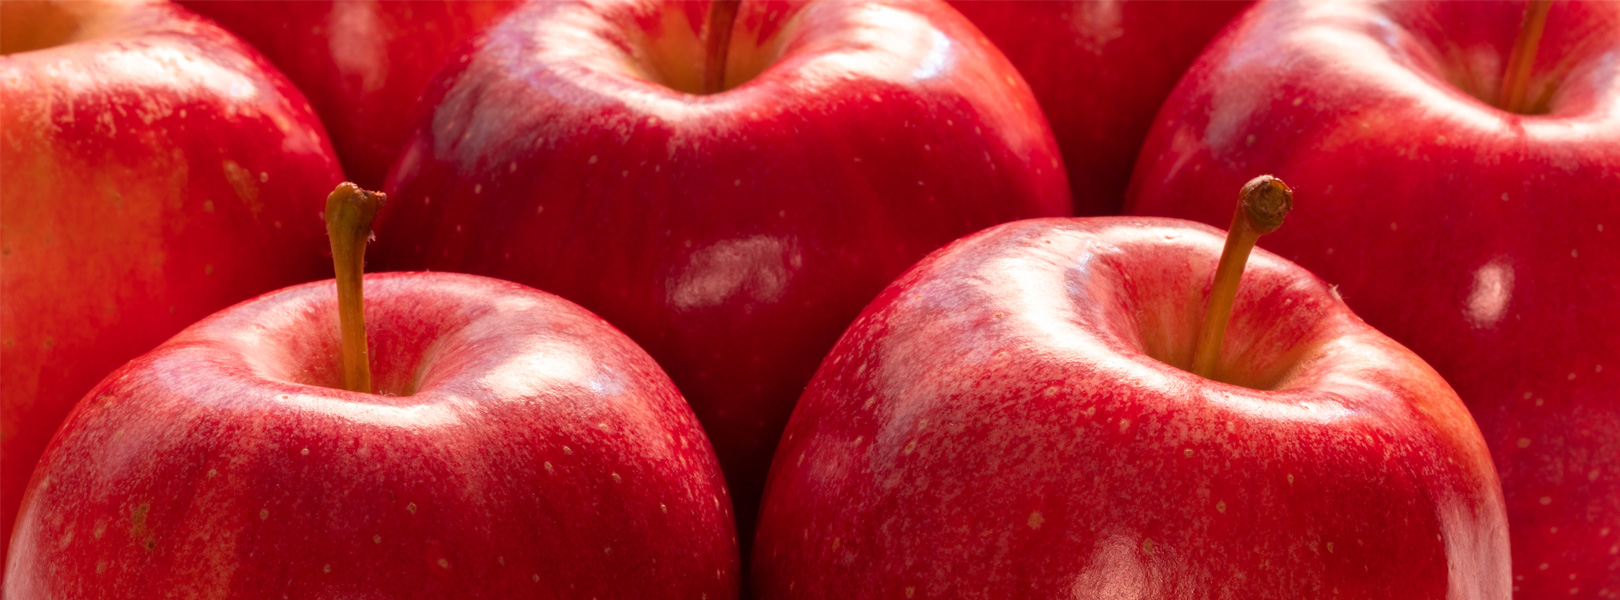 Bright red apples